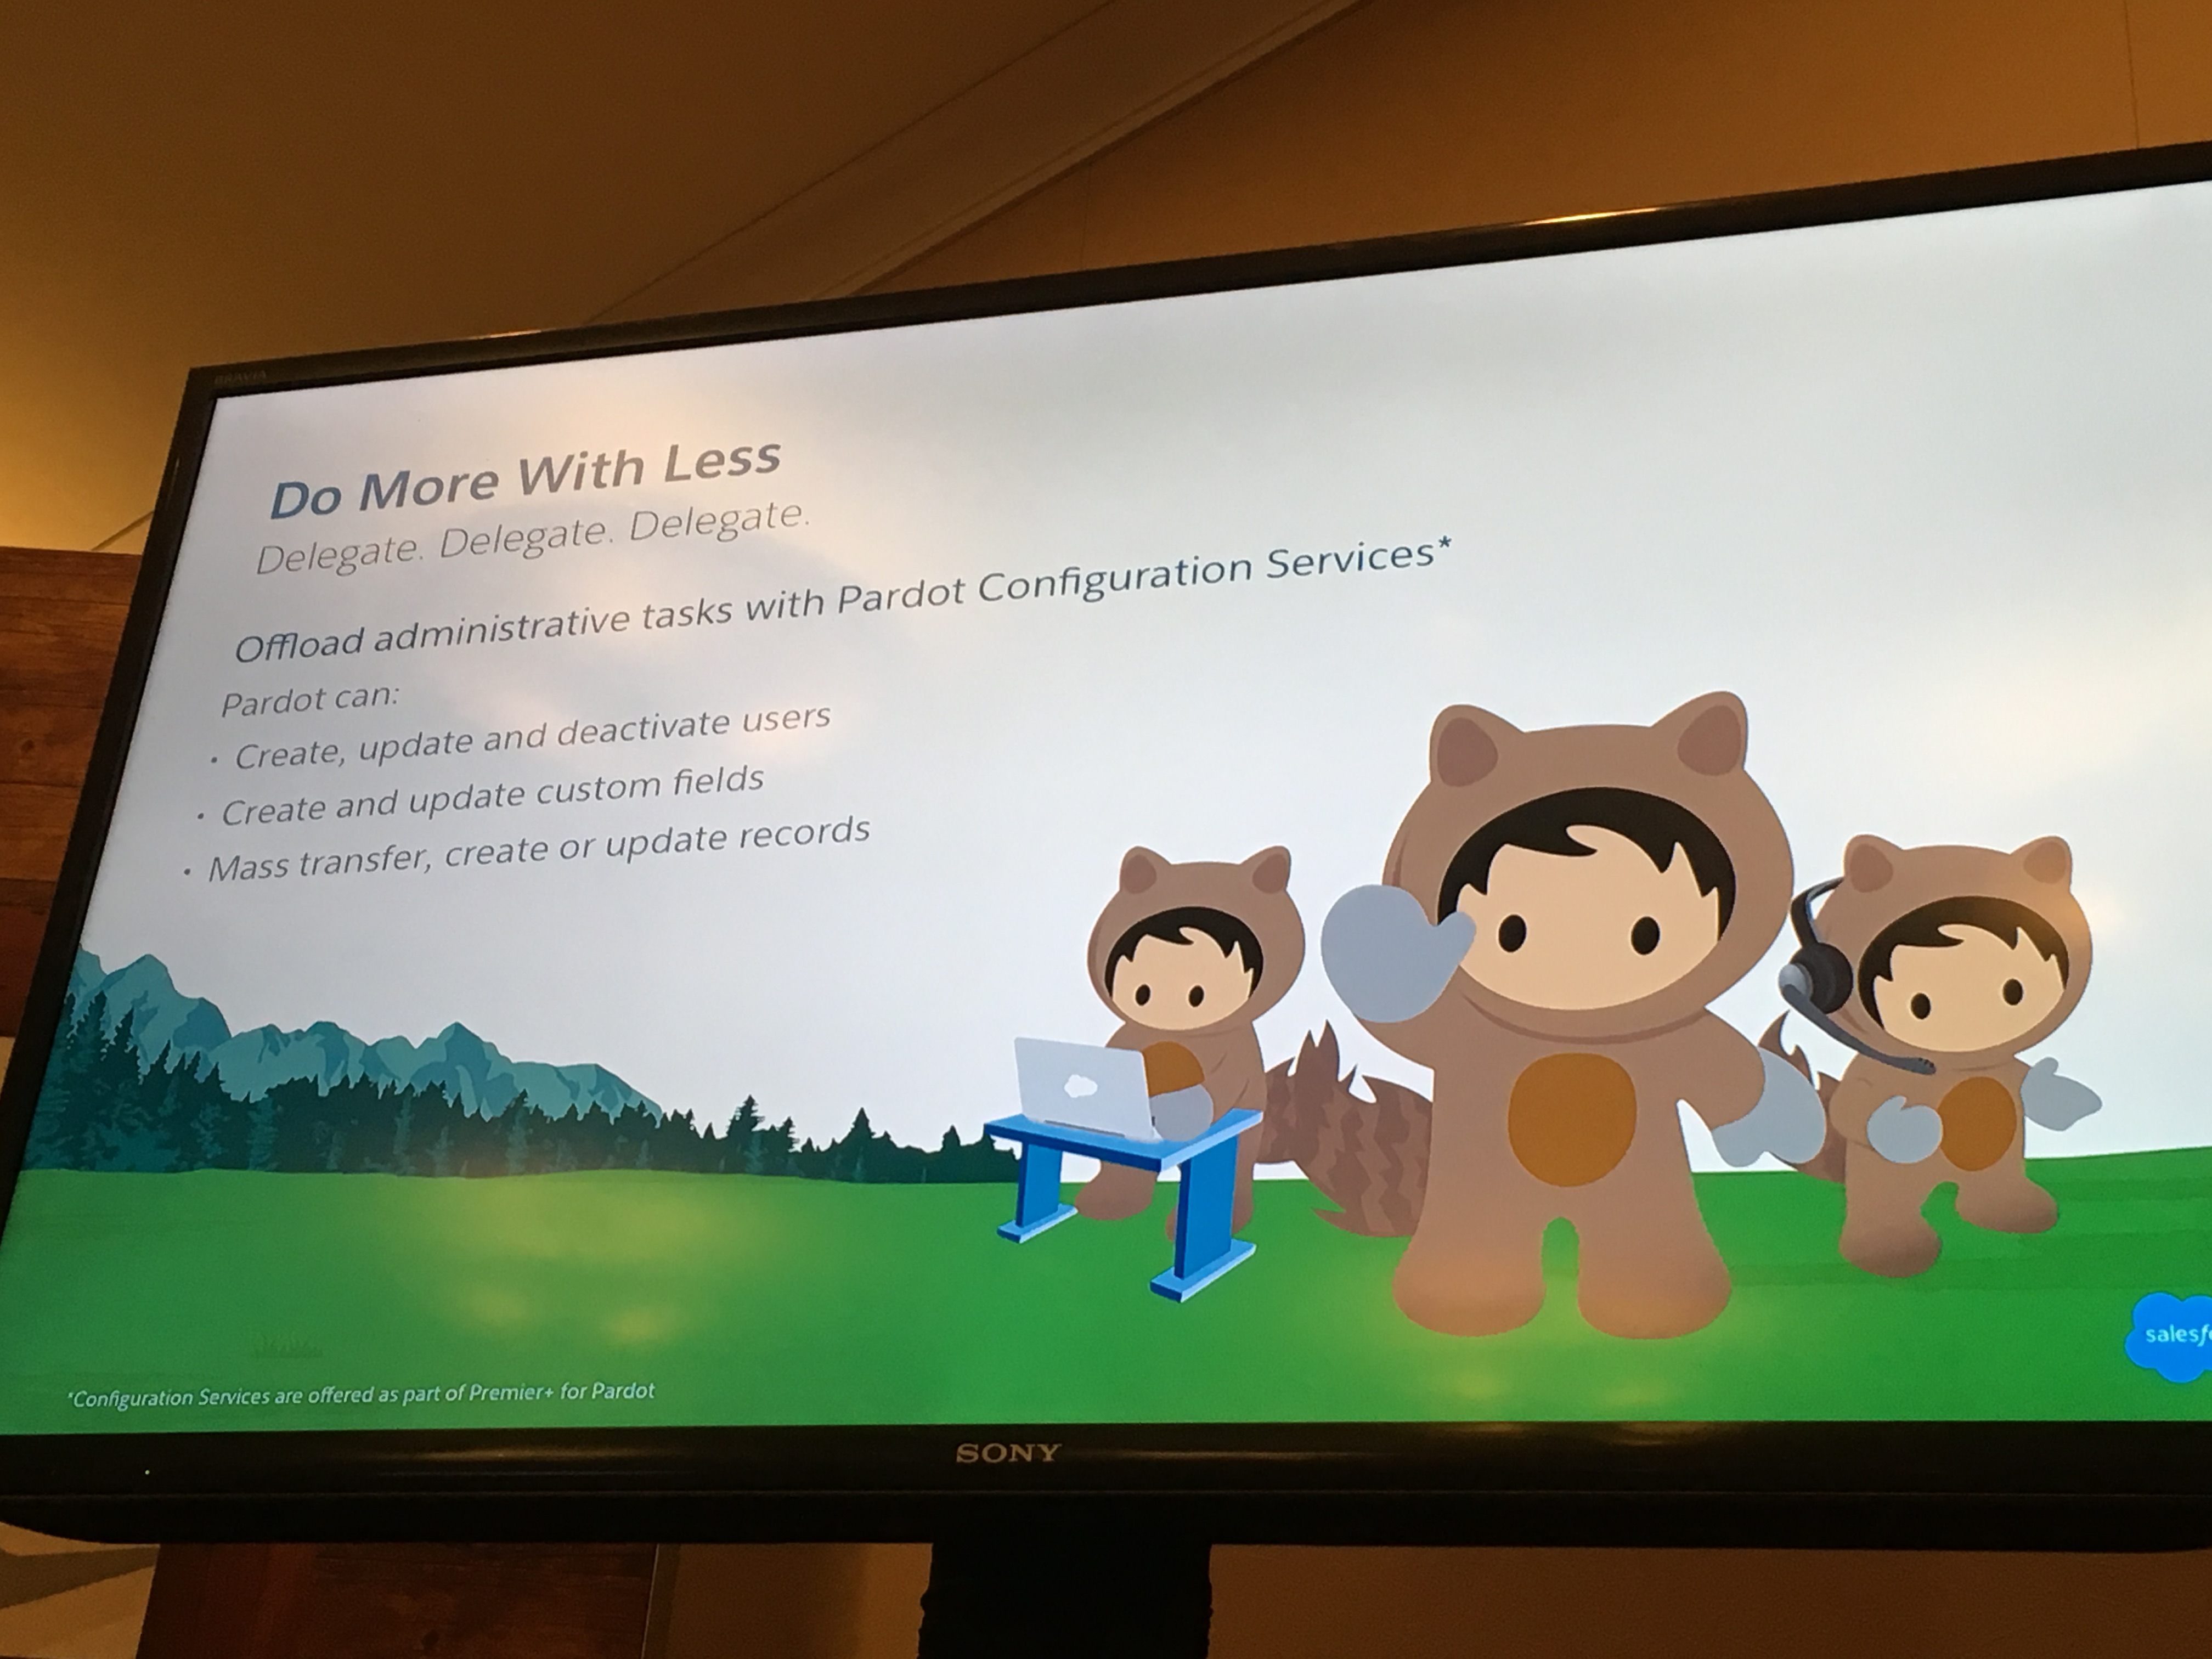 Pardot’s admin support services as outlined in a Dreamforce 2017 session.